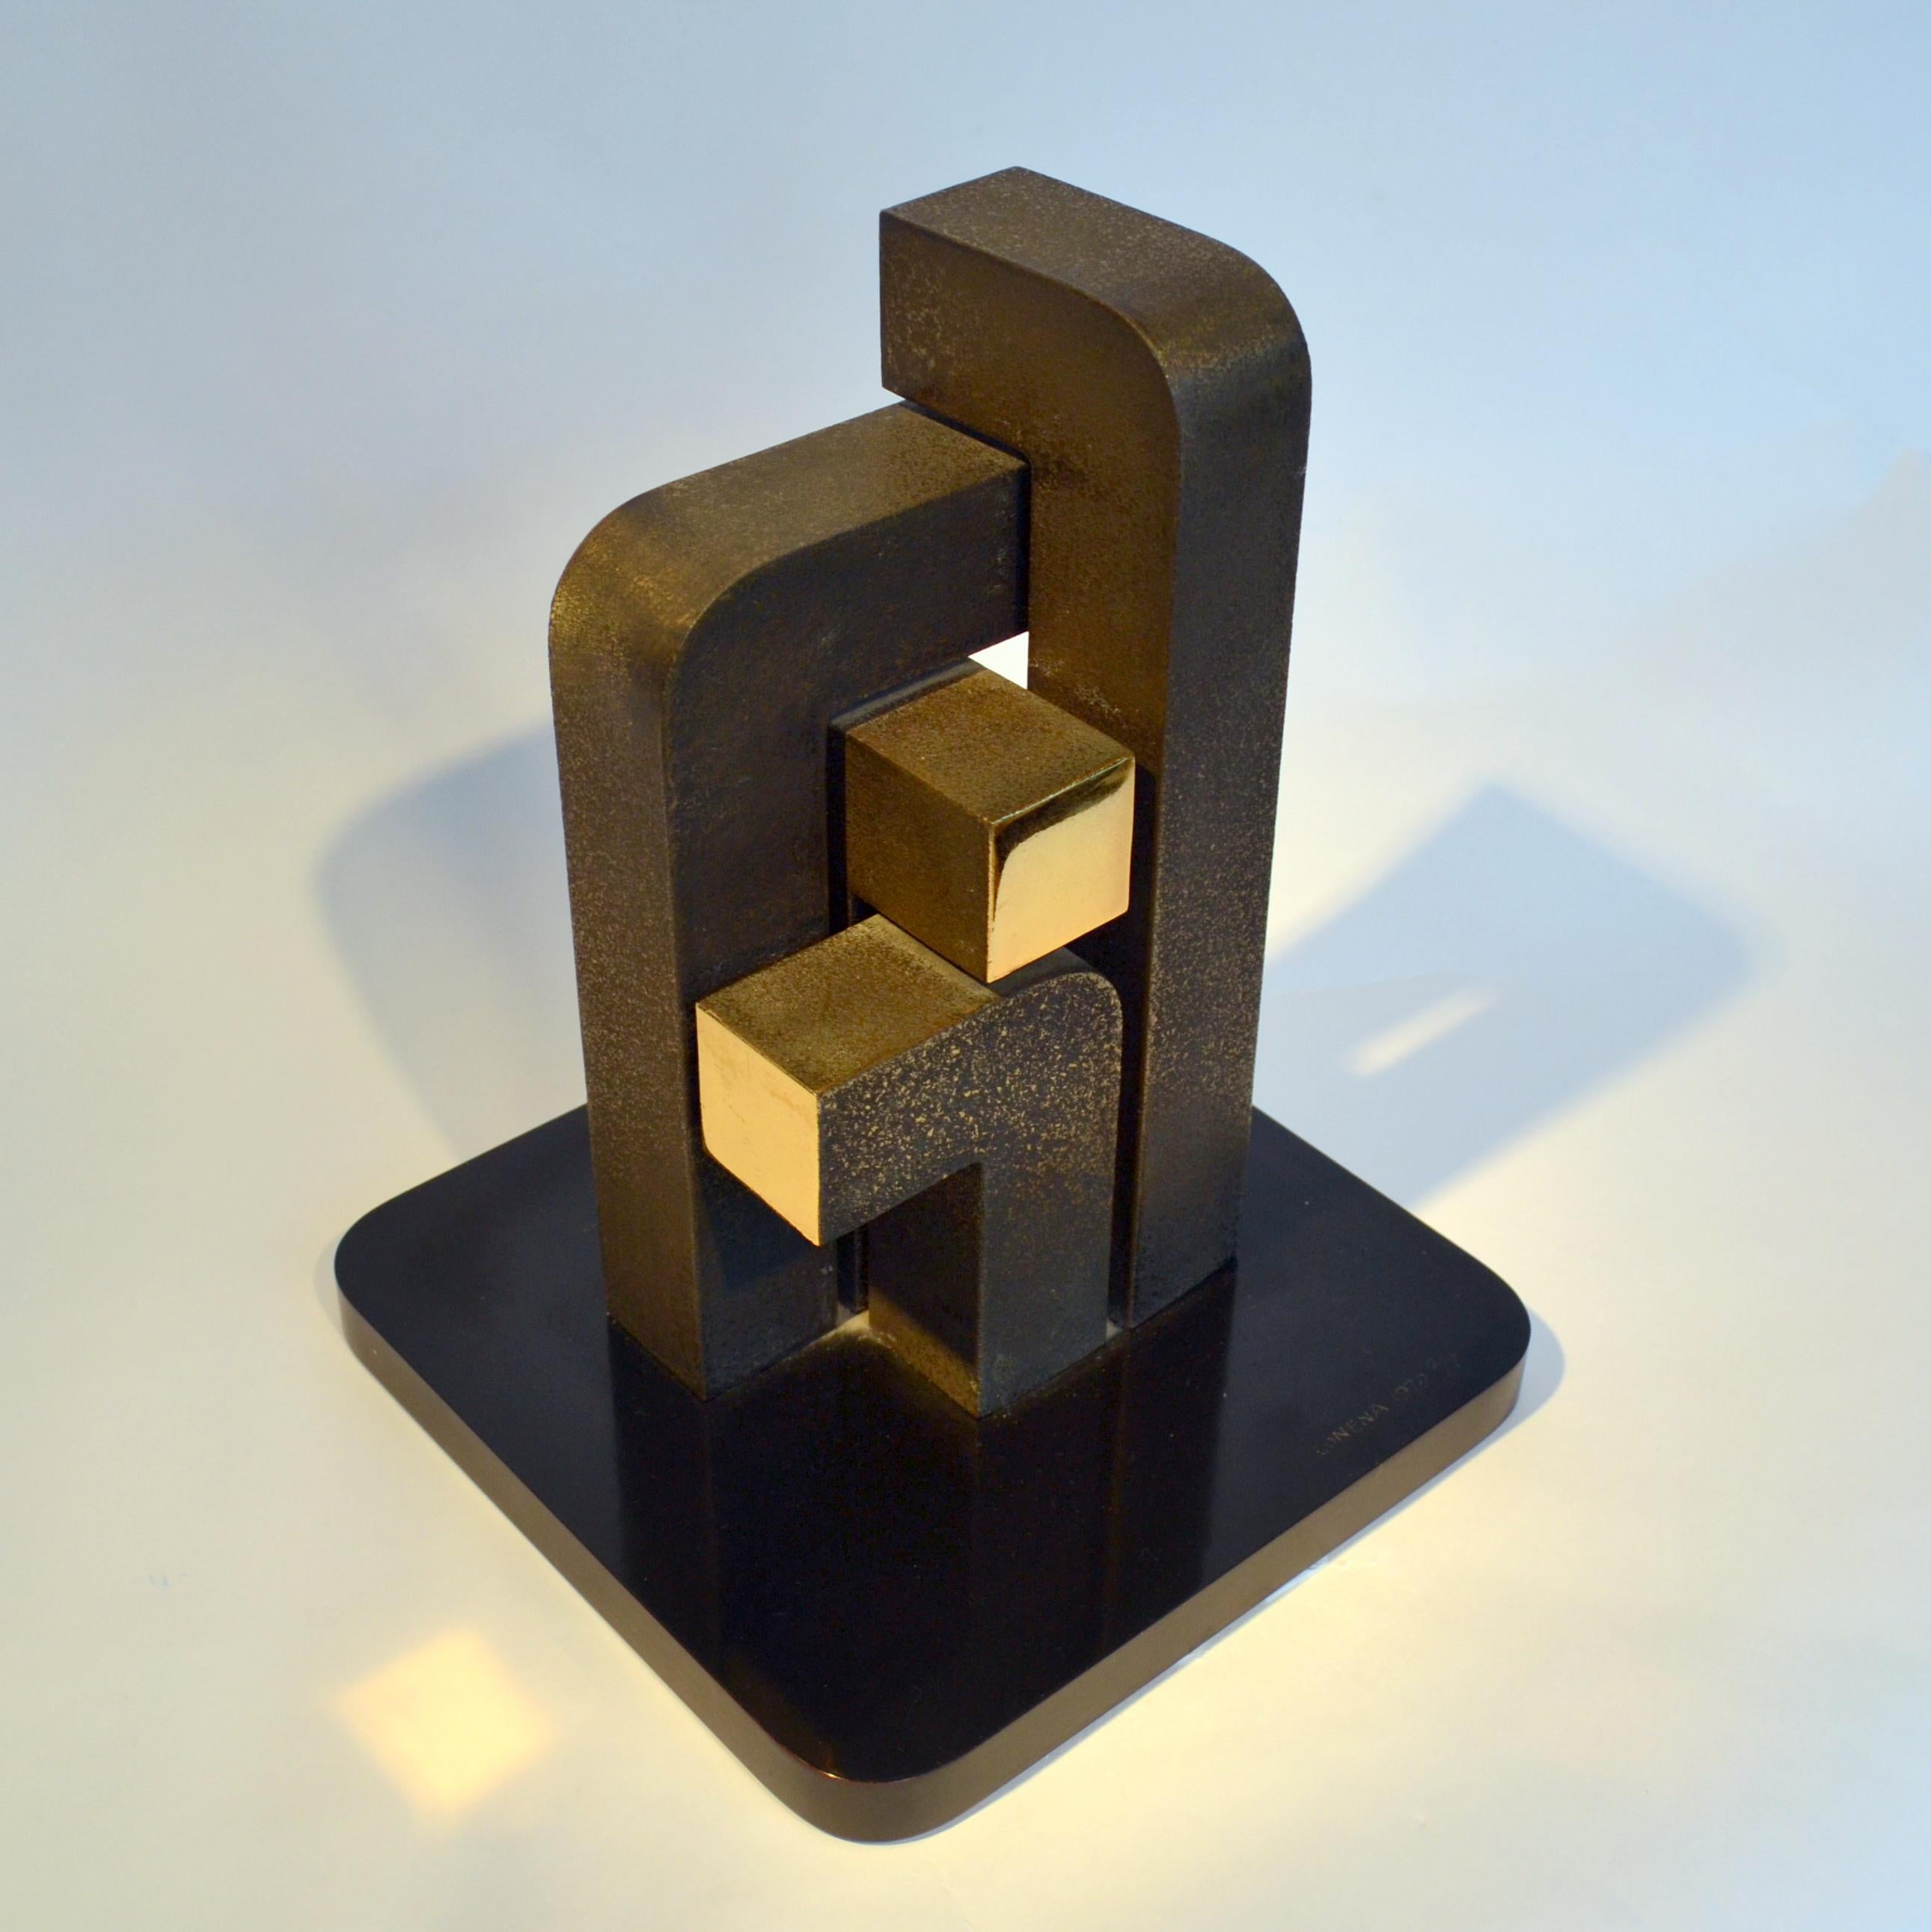 Abstract Geometric Minimalist Bronze Sculpture by Zonena 1979 in Limited Edition 8